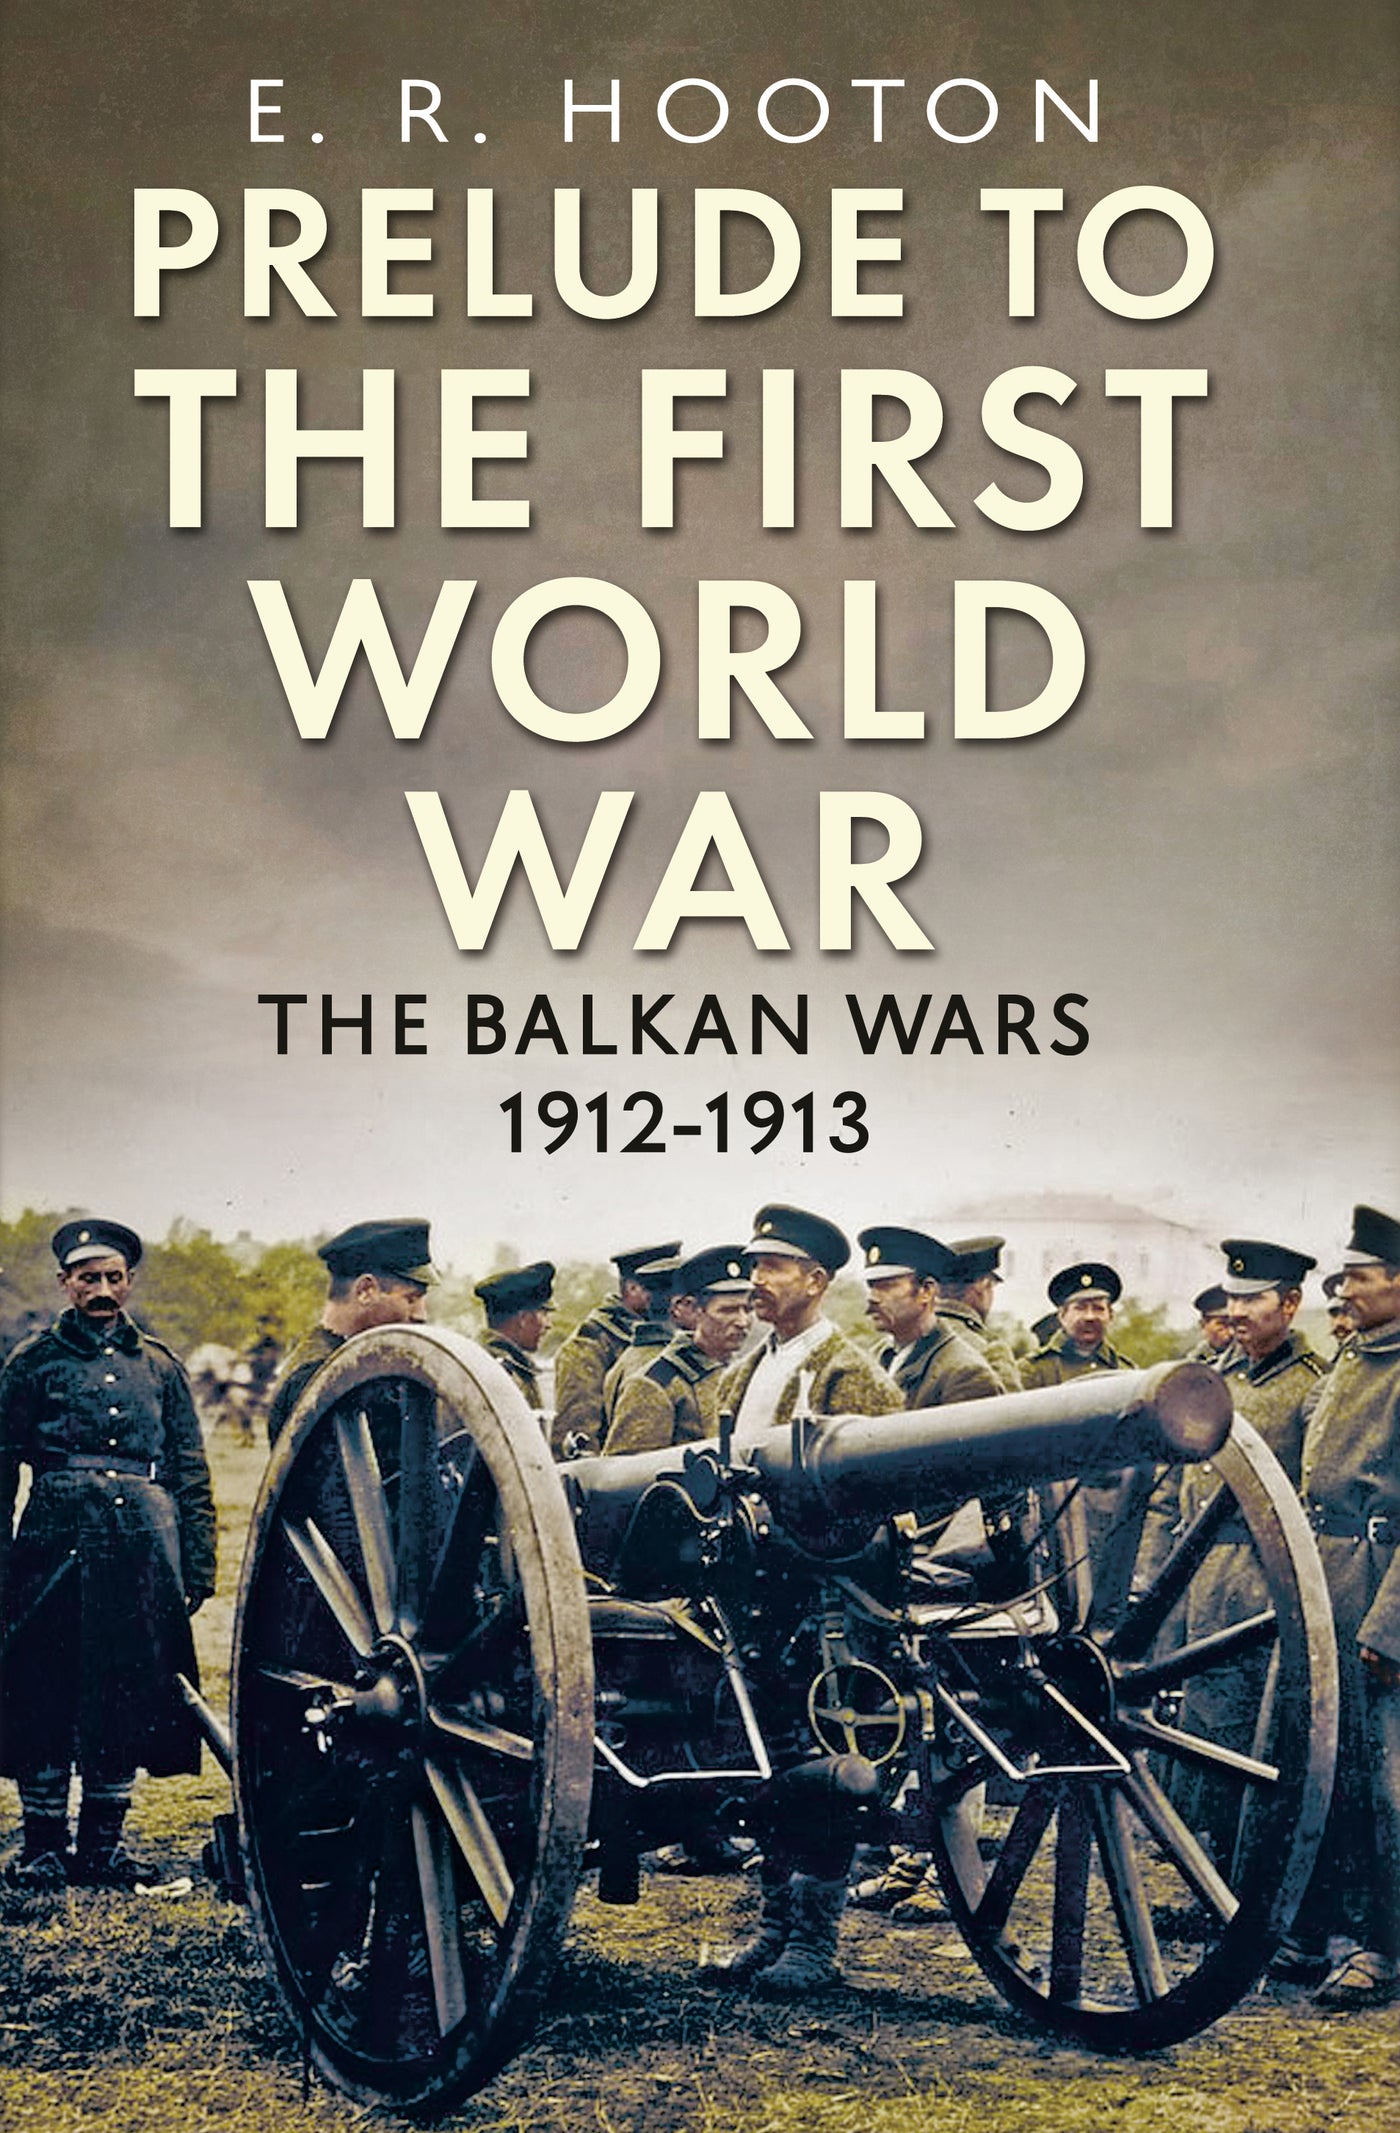 Prelude to the First World War